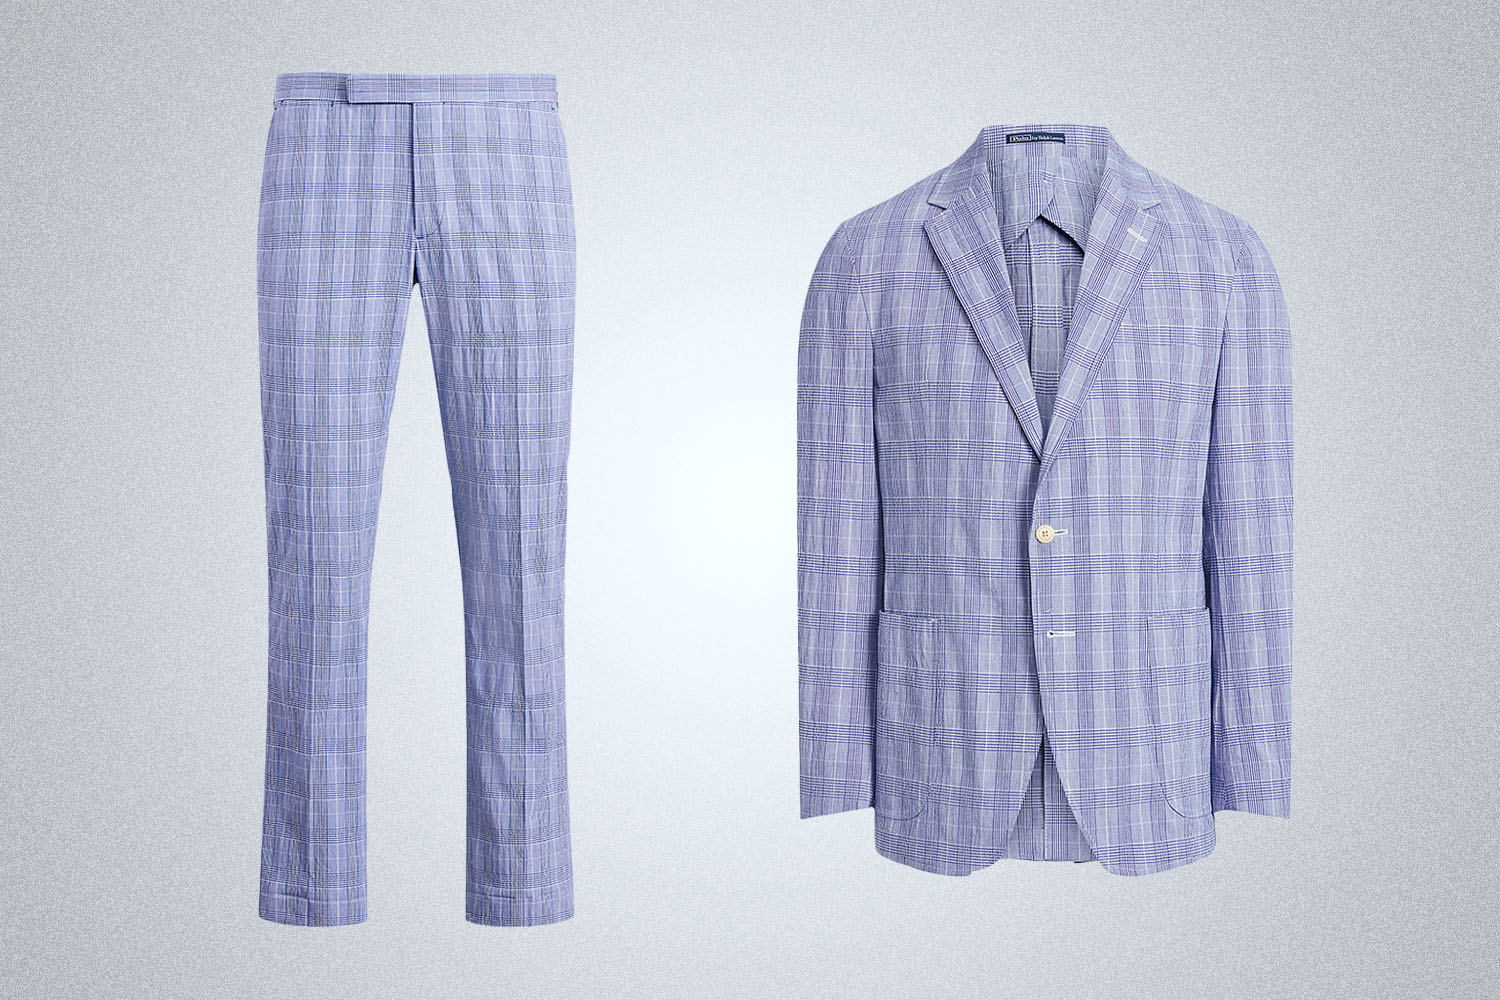 a blue checked seersucker suit from Polo Ralph Lauren on a grey background